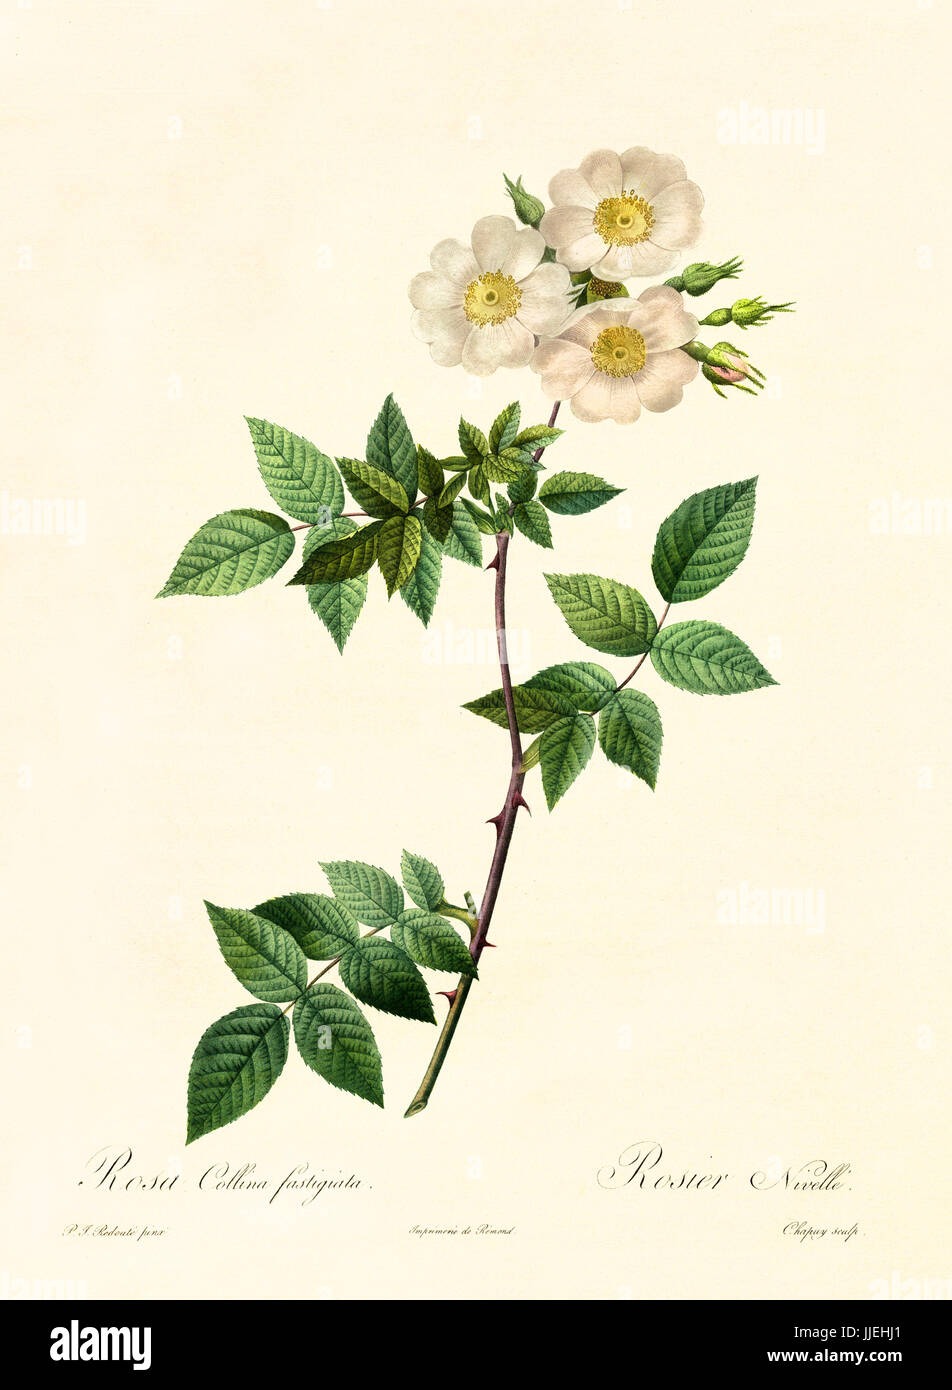 Old illustration of Rosa collina fastigiata. Created by P. R. Redoute, published on Les Roses, Imp. Firmin Didot, Paris, 1817-24 Stock Photo